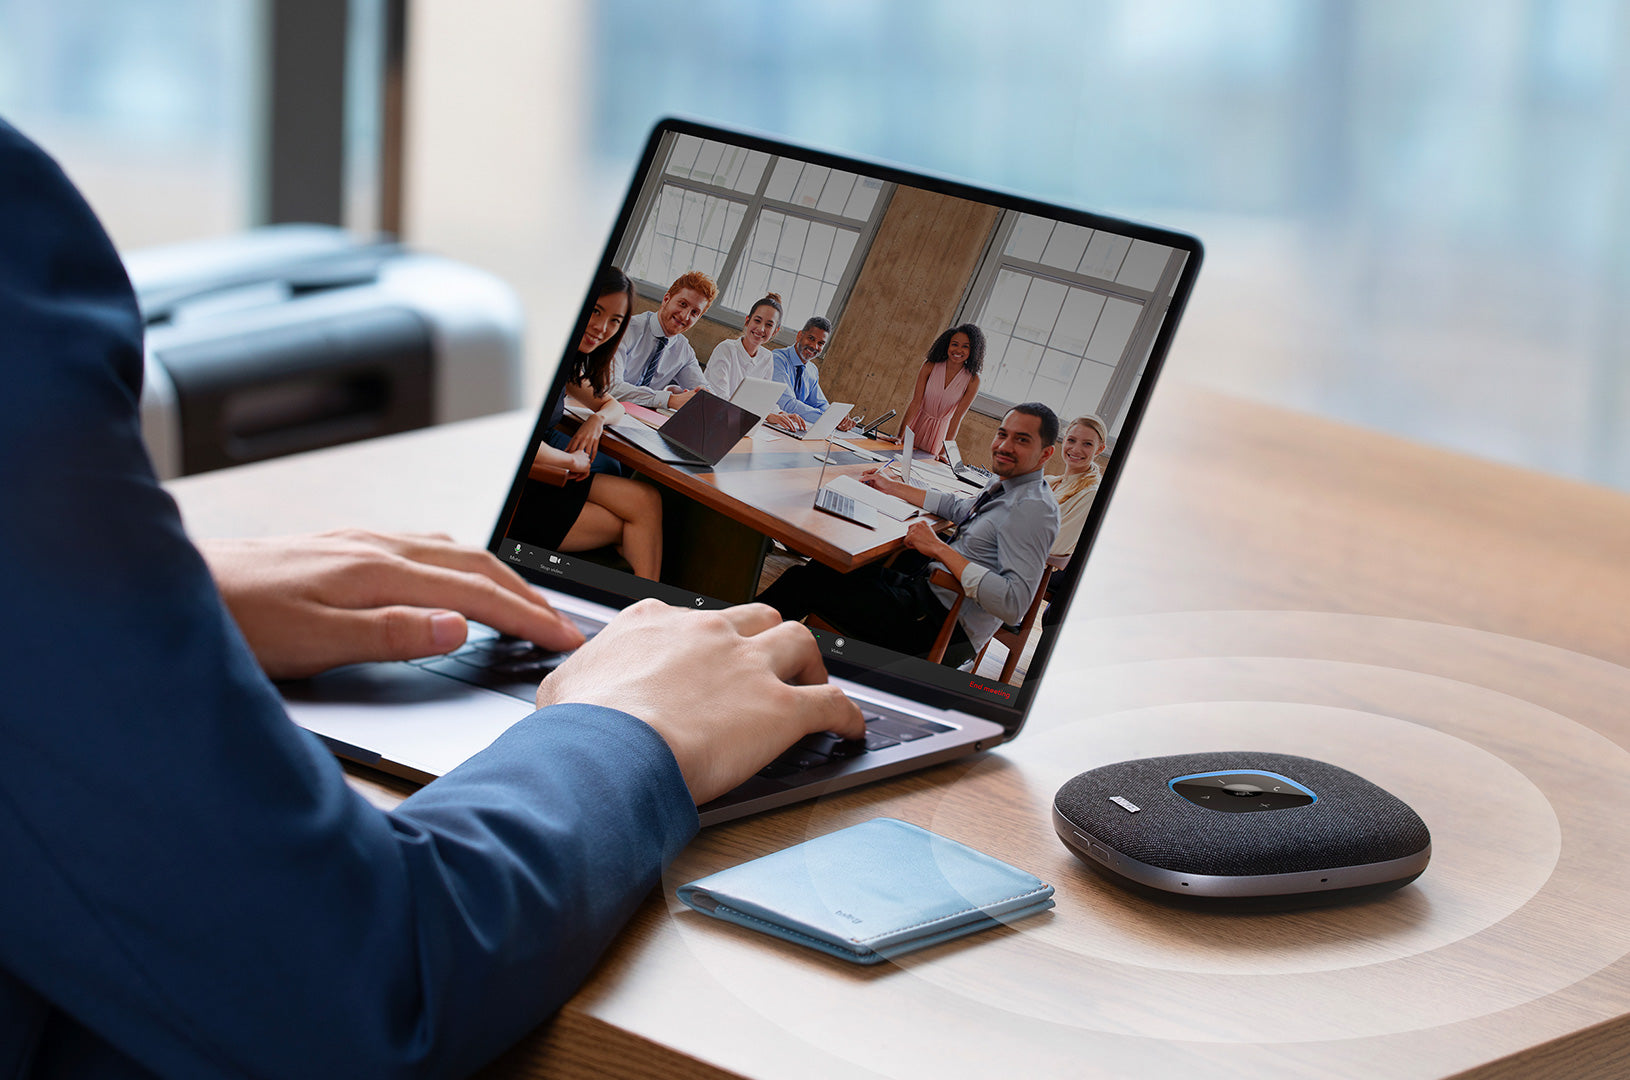 Make conference calls with a high-quality conference speaker, like Anker PowerConf S3 Bluetooth speakerphone.